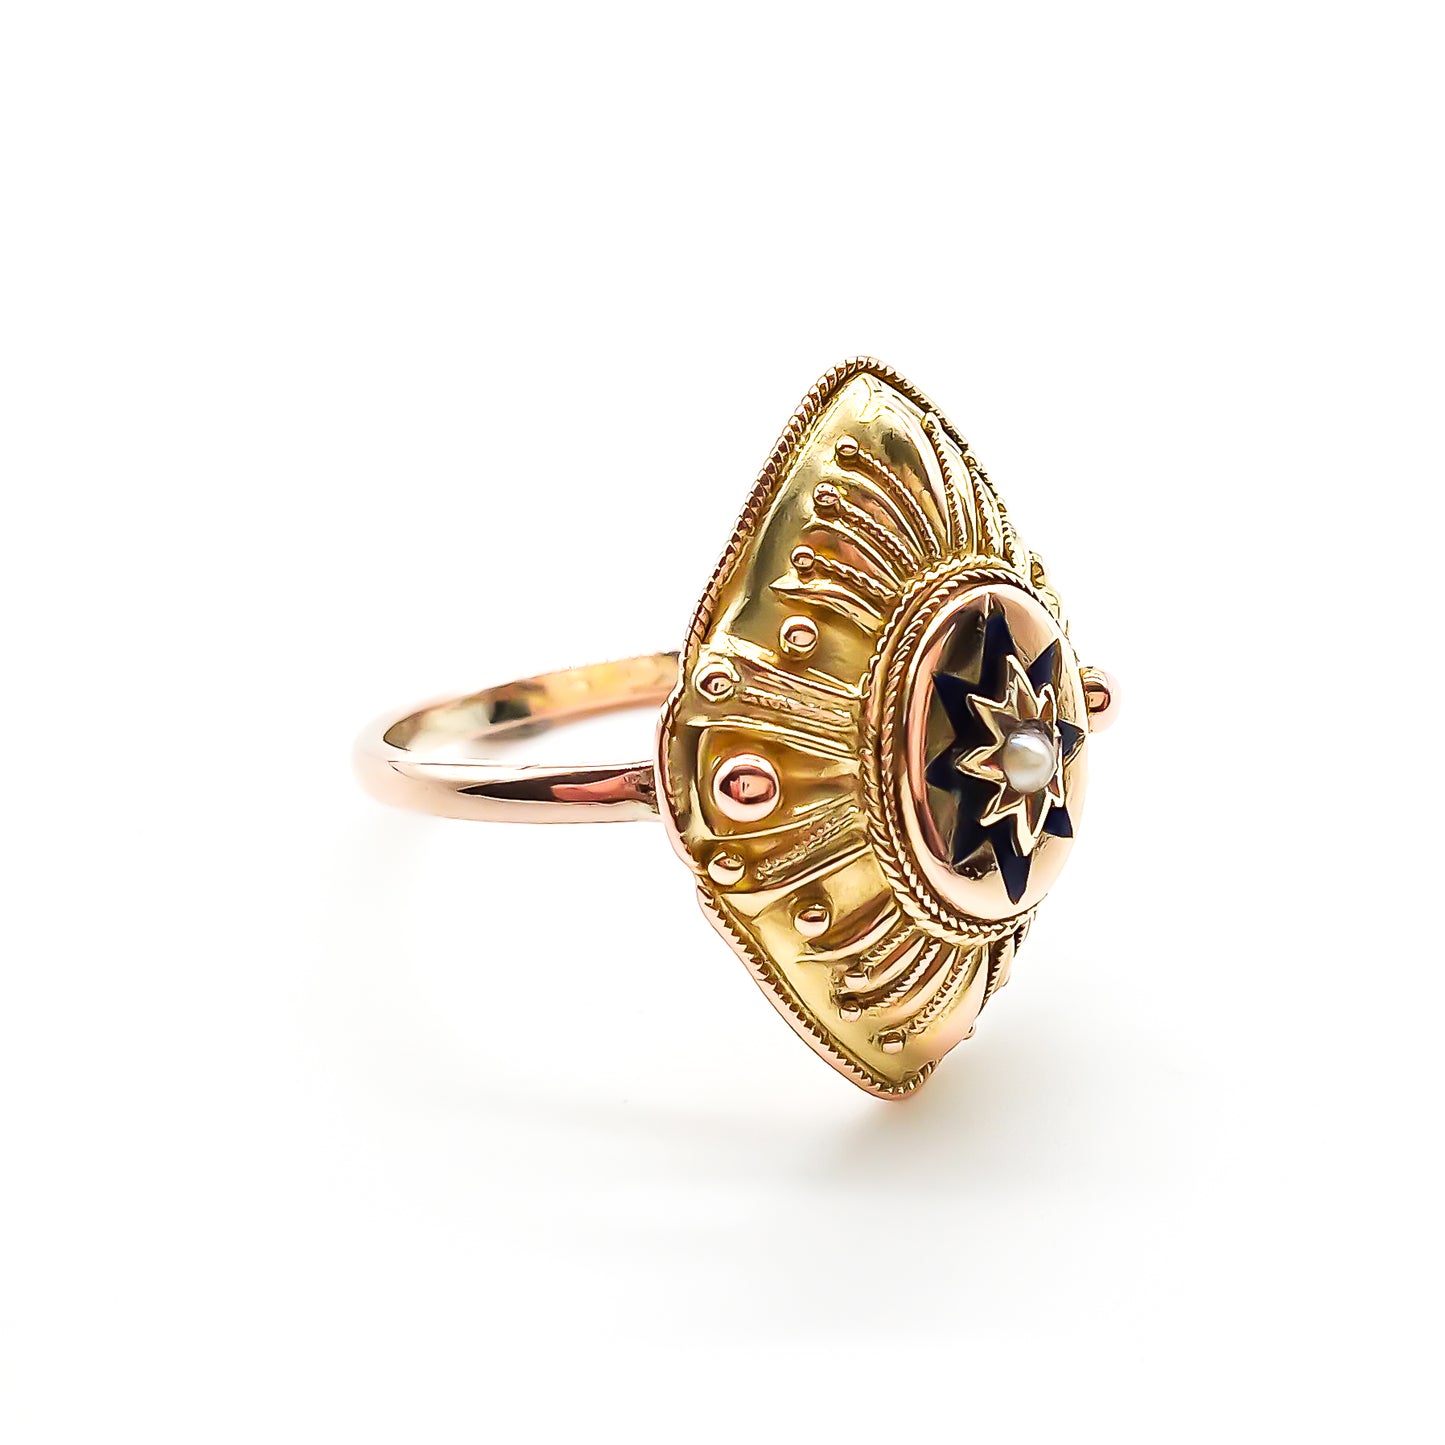 Lovely 15ct yellow gold Victorian ring with ornate detail. The ring is set with a single seed pearl, surrounded by dark blue enamelling in the shape of a star. Later shank.